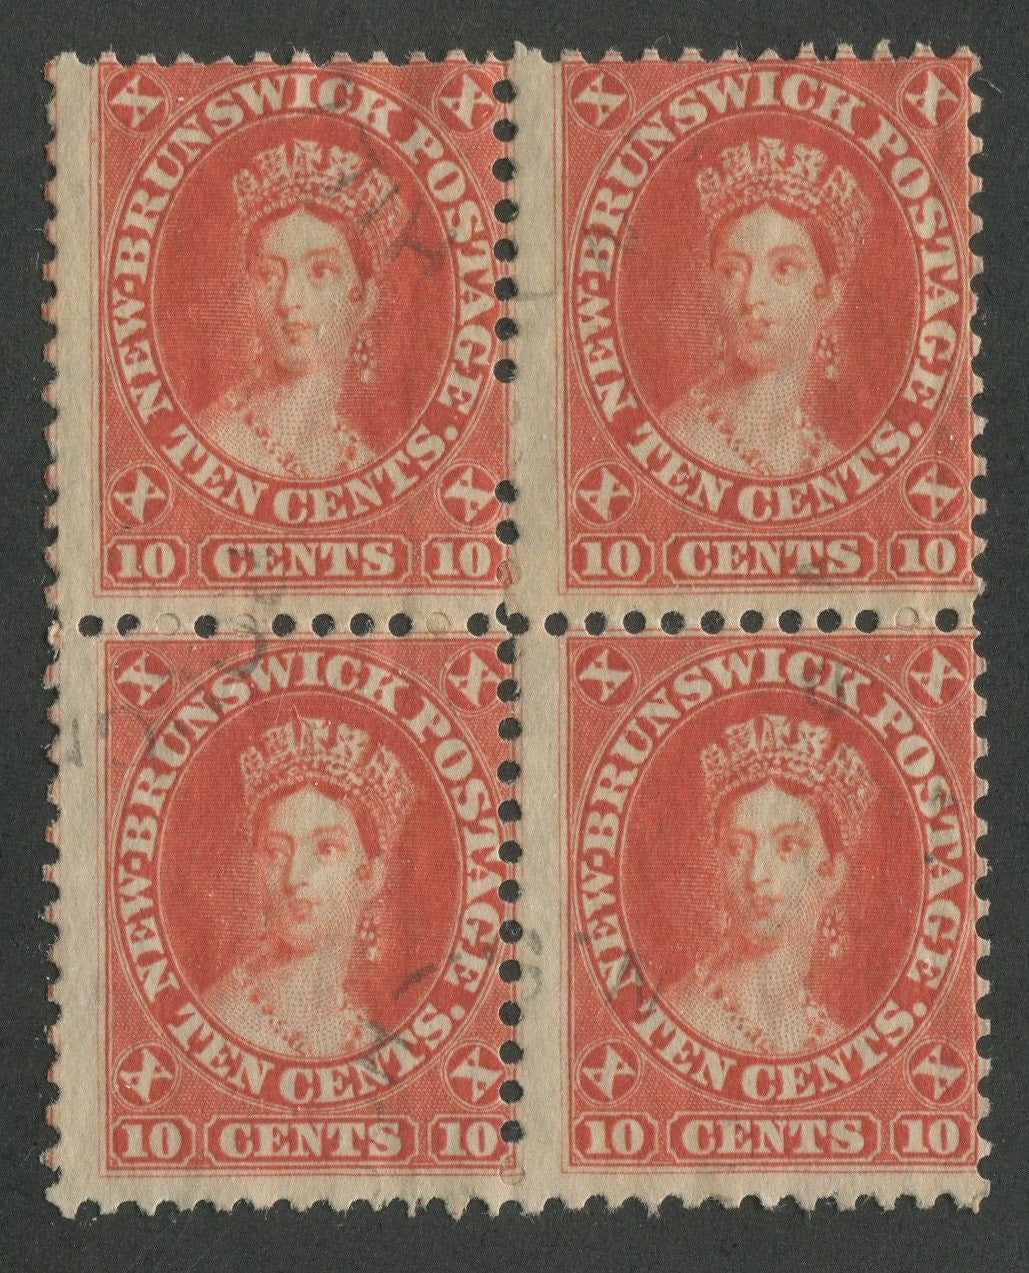 0009NB1707 - New Brunswick #9 - Used Block of 4 - Deveney Stamps Ltd. Canadian Stamps